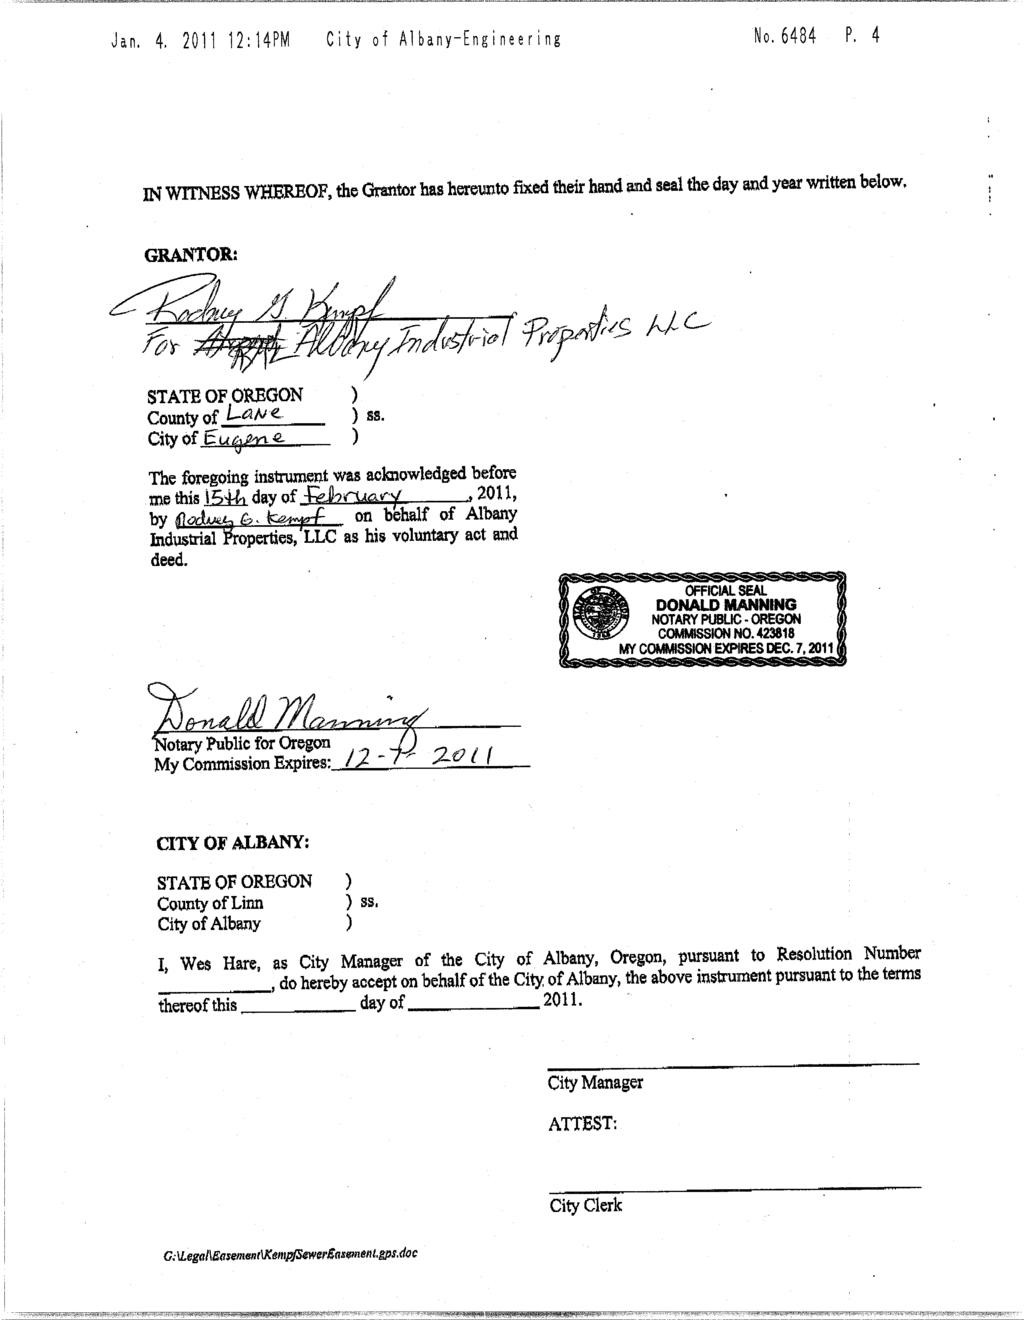 Jan. 4. 2011 12:14PM City of Albany Engineering No.6484 P. 4 IN WITNESS WHEREOF, the Grantor has hereunto fixed their hand and seal the day and year written below.